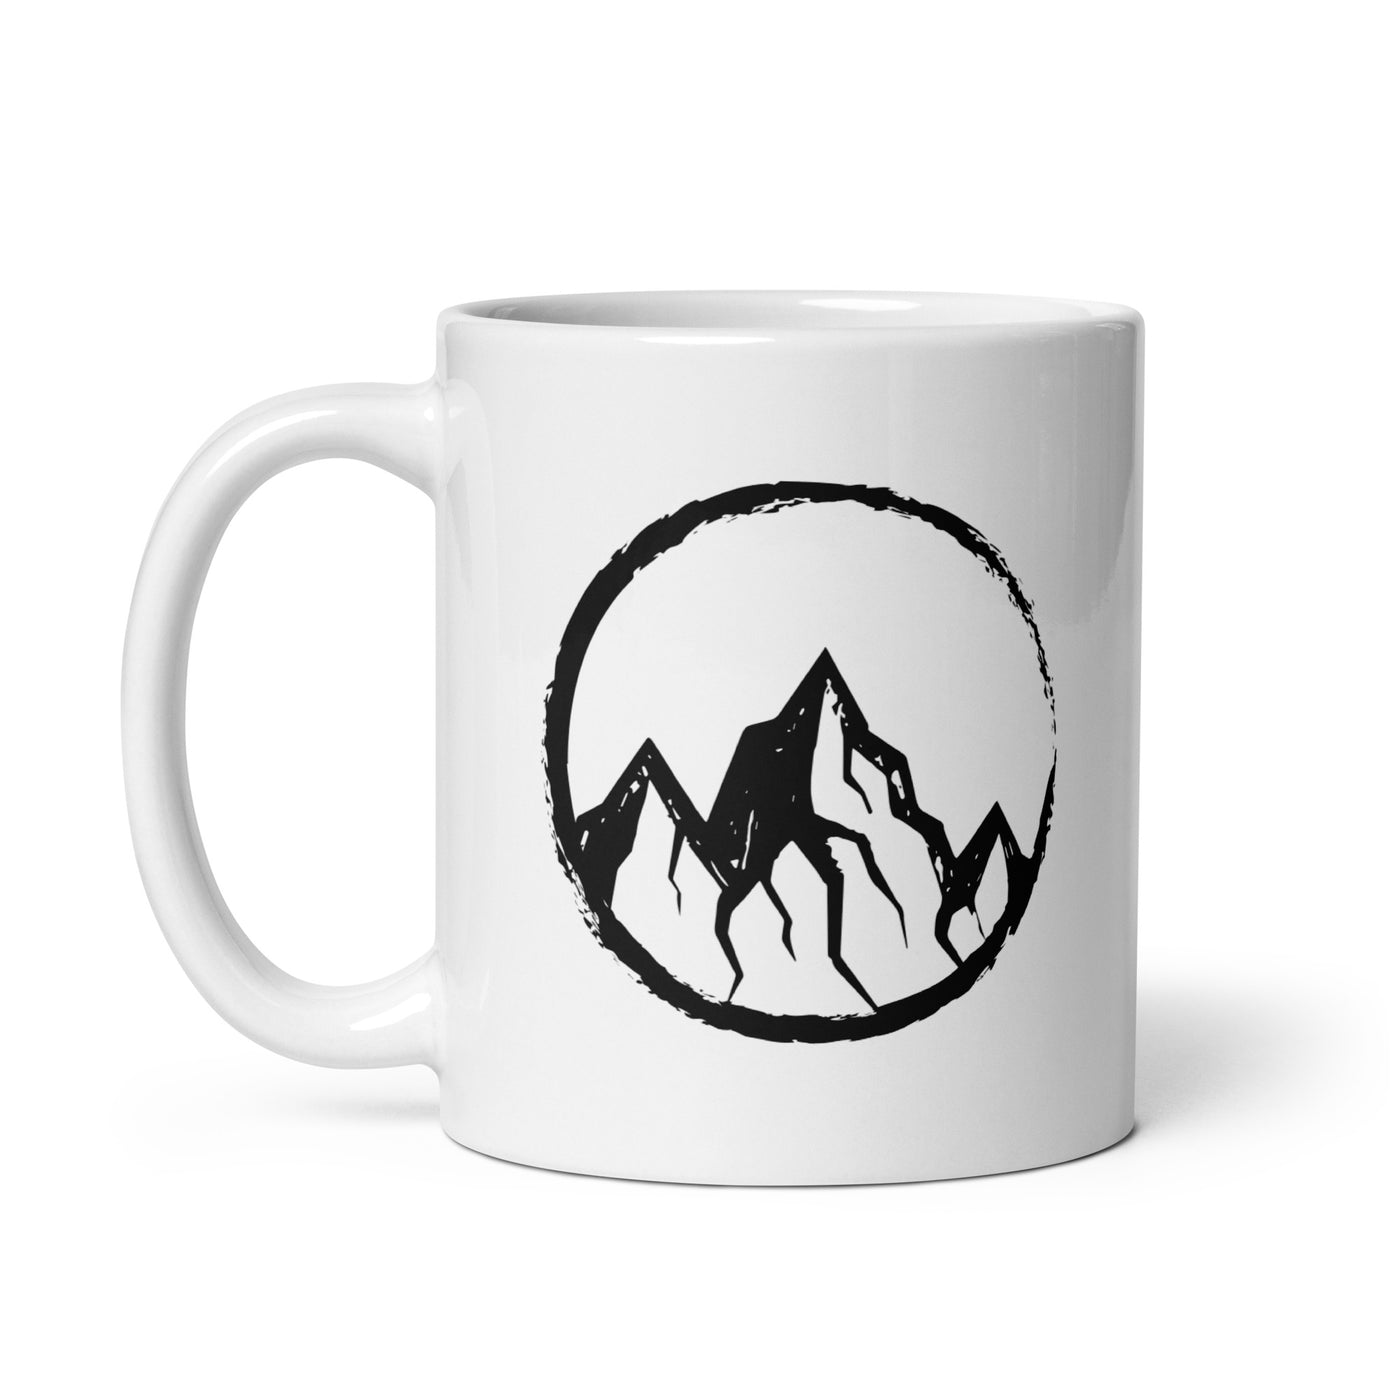 Cricle And Mountain - Tasse berge 11oz